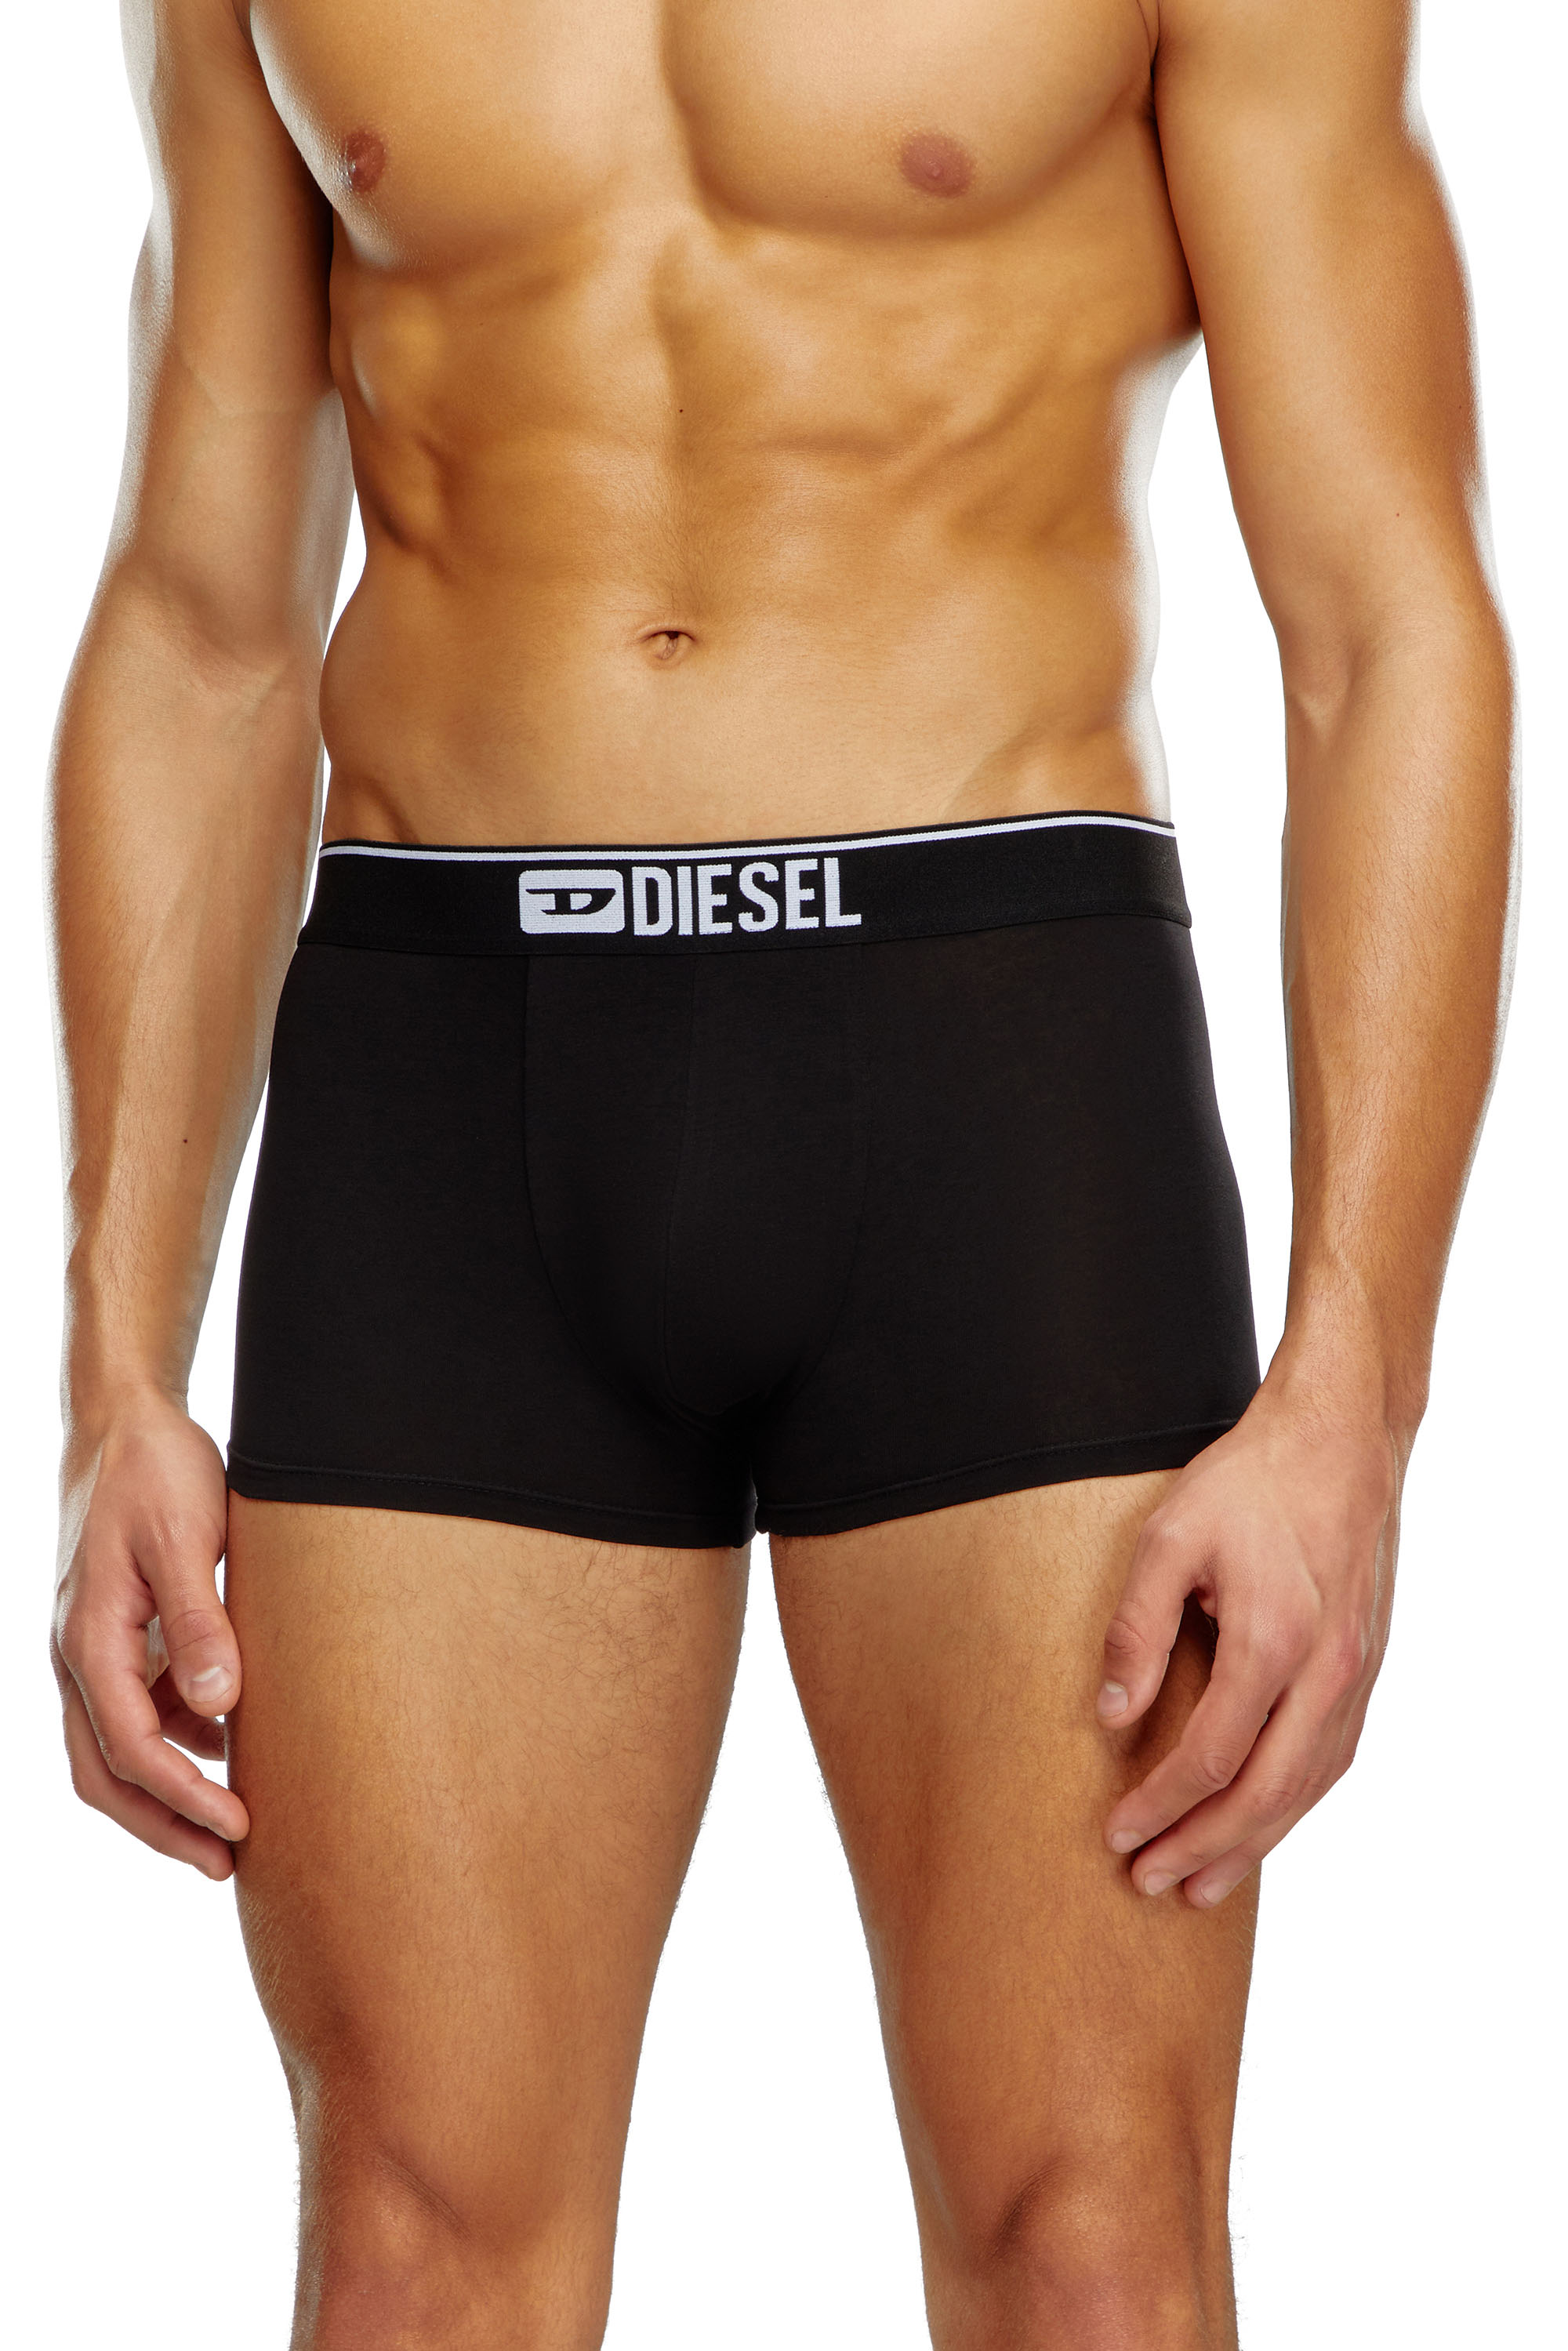 Men's Boxer Shorts: in Cotton, Solid Color or Patterned